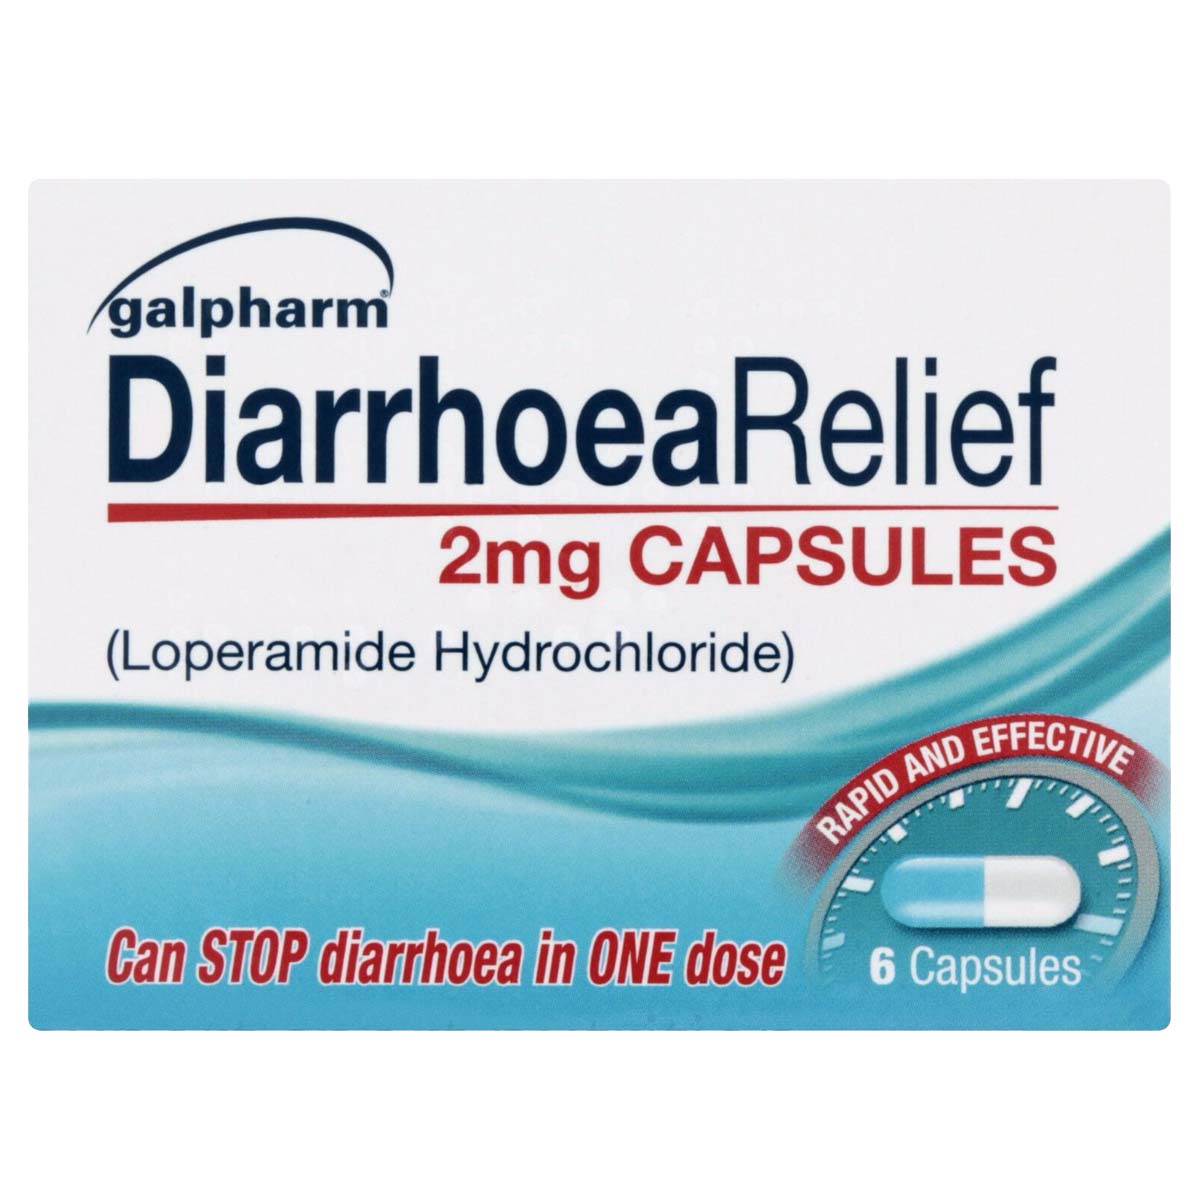 Galpharm - Diarrhoea Relief 2mg Capsules - 6 pcs - Continental Food Store